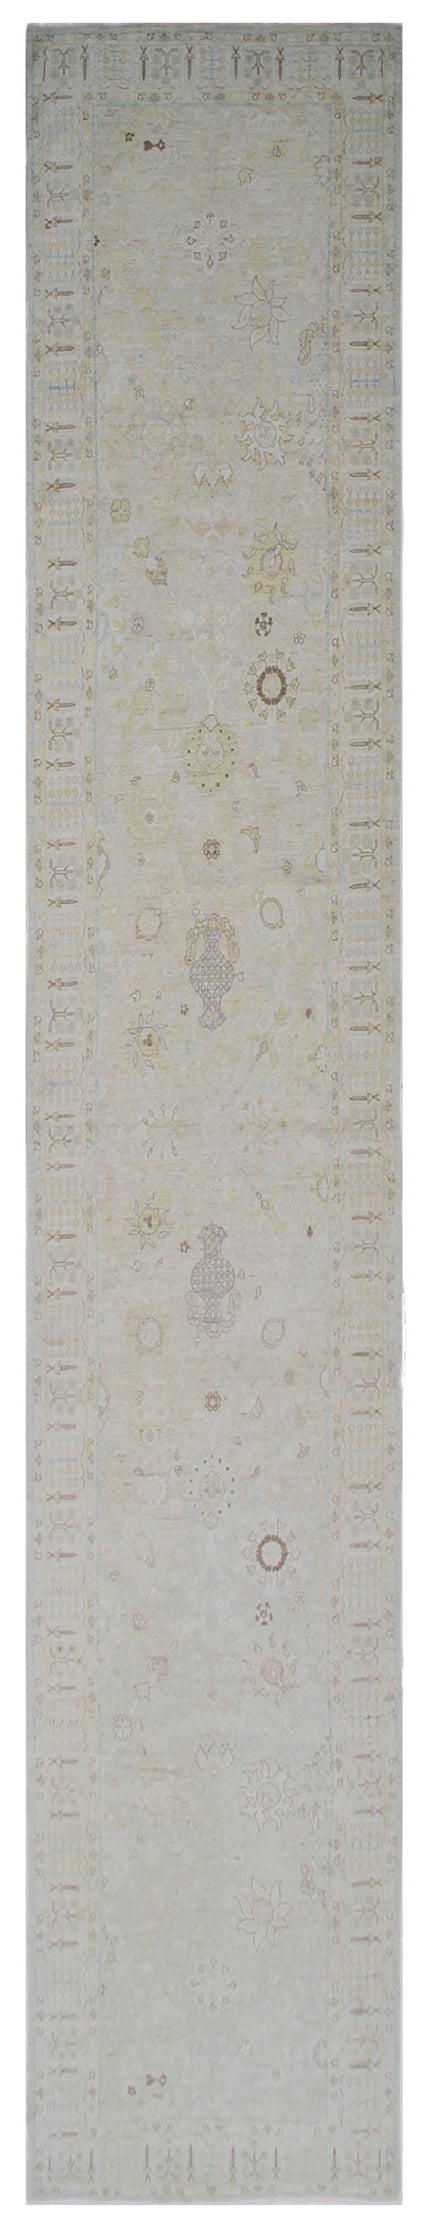 4'x19' Ariana Transitional Wide and Long Runner Rug